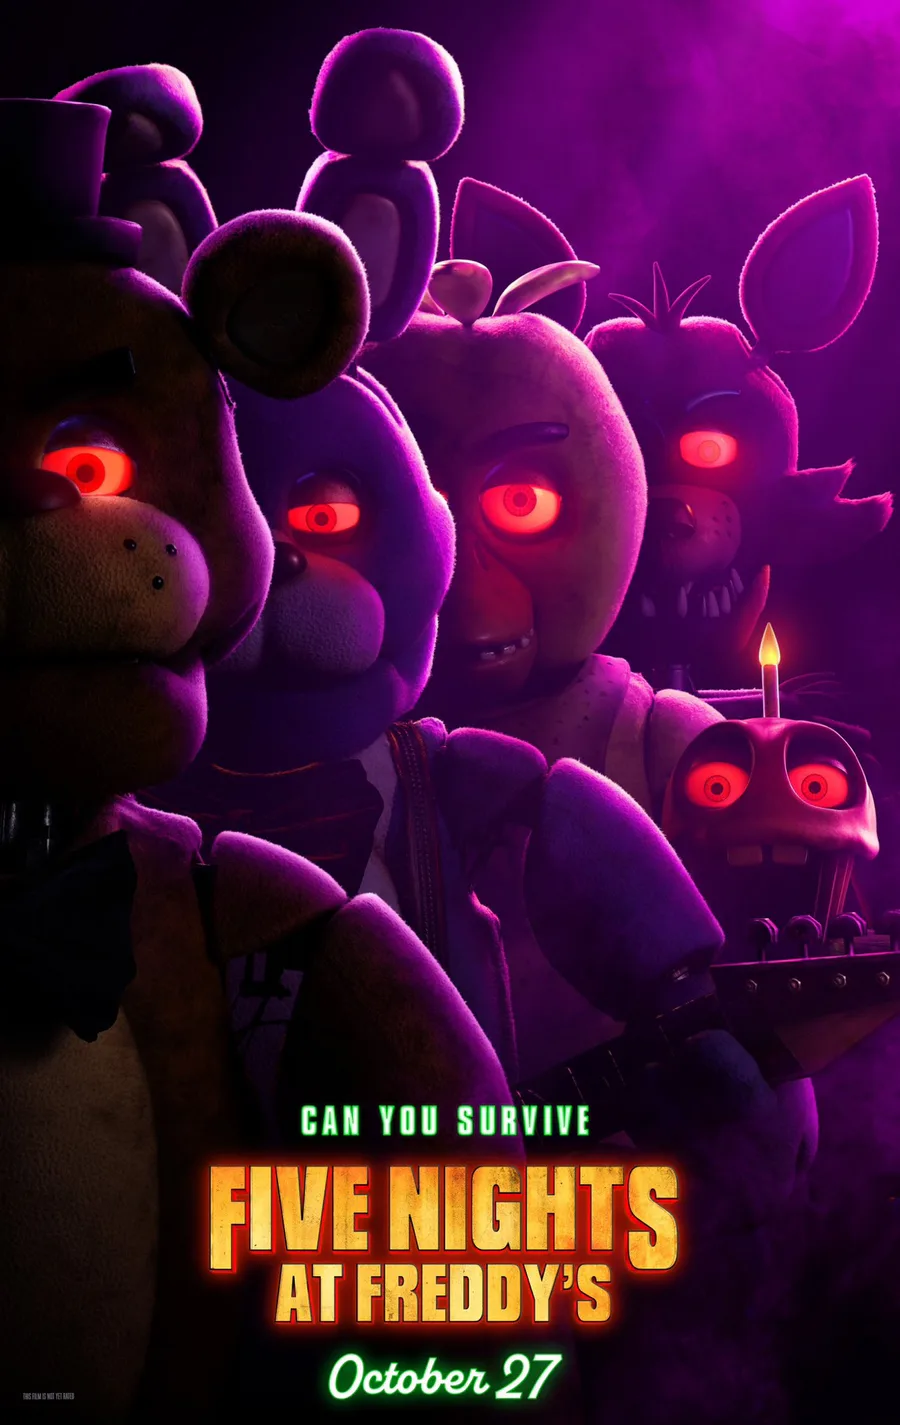 GrayHat - productions on Game Jolt: fnaf SB poster by me